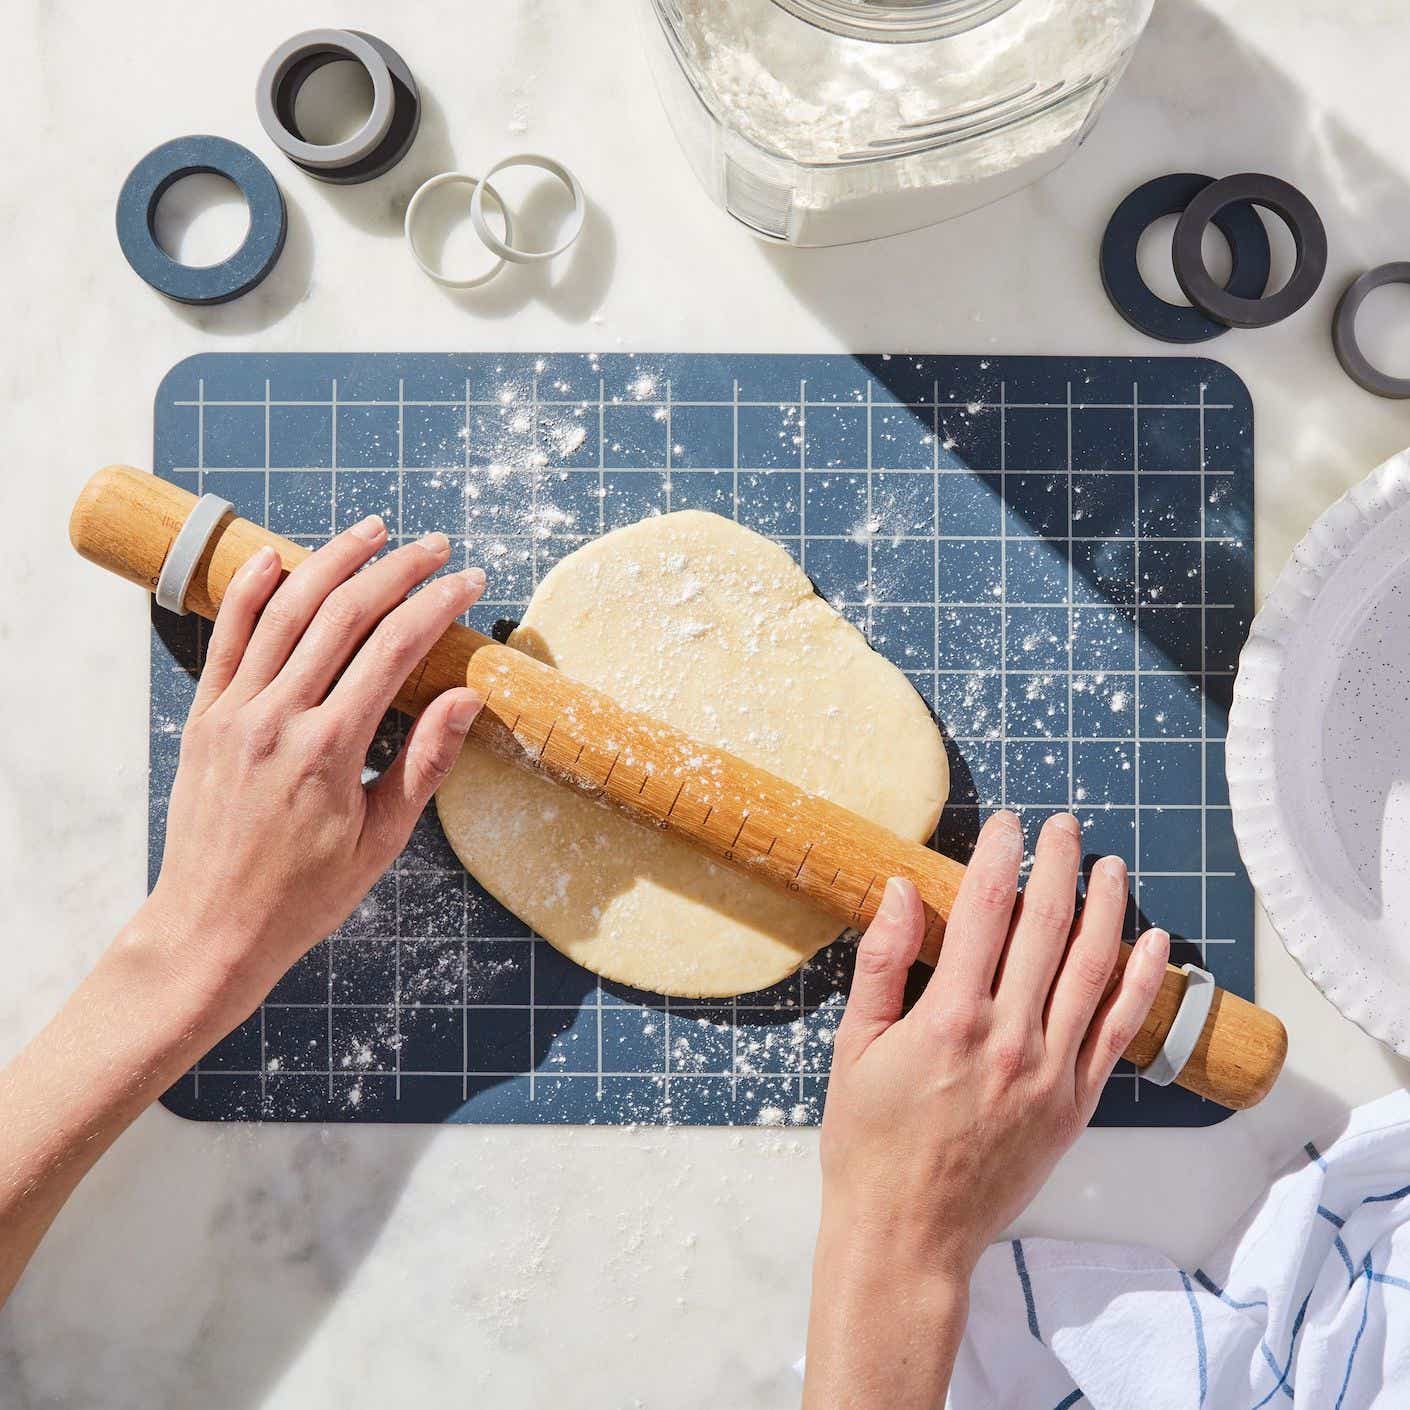 A pair of hands pushes a wooden rolling pin through a ball of dough which rests on a dark blue silicone baking mat.